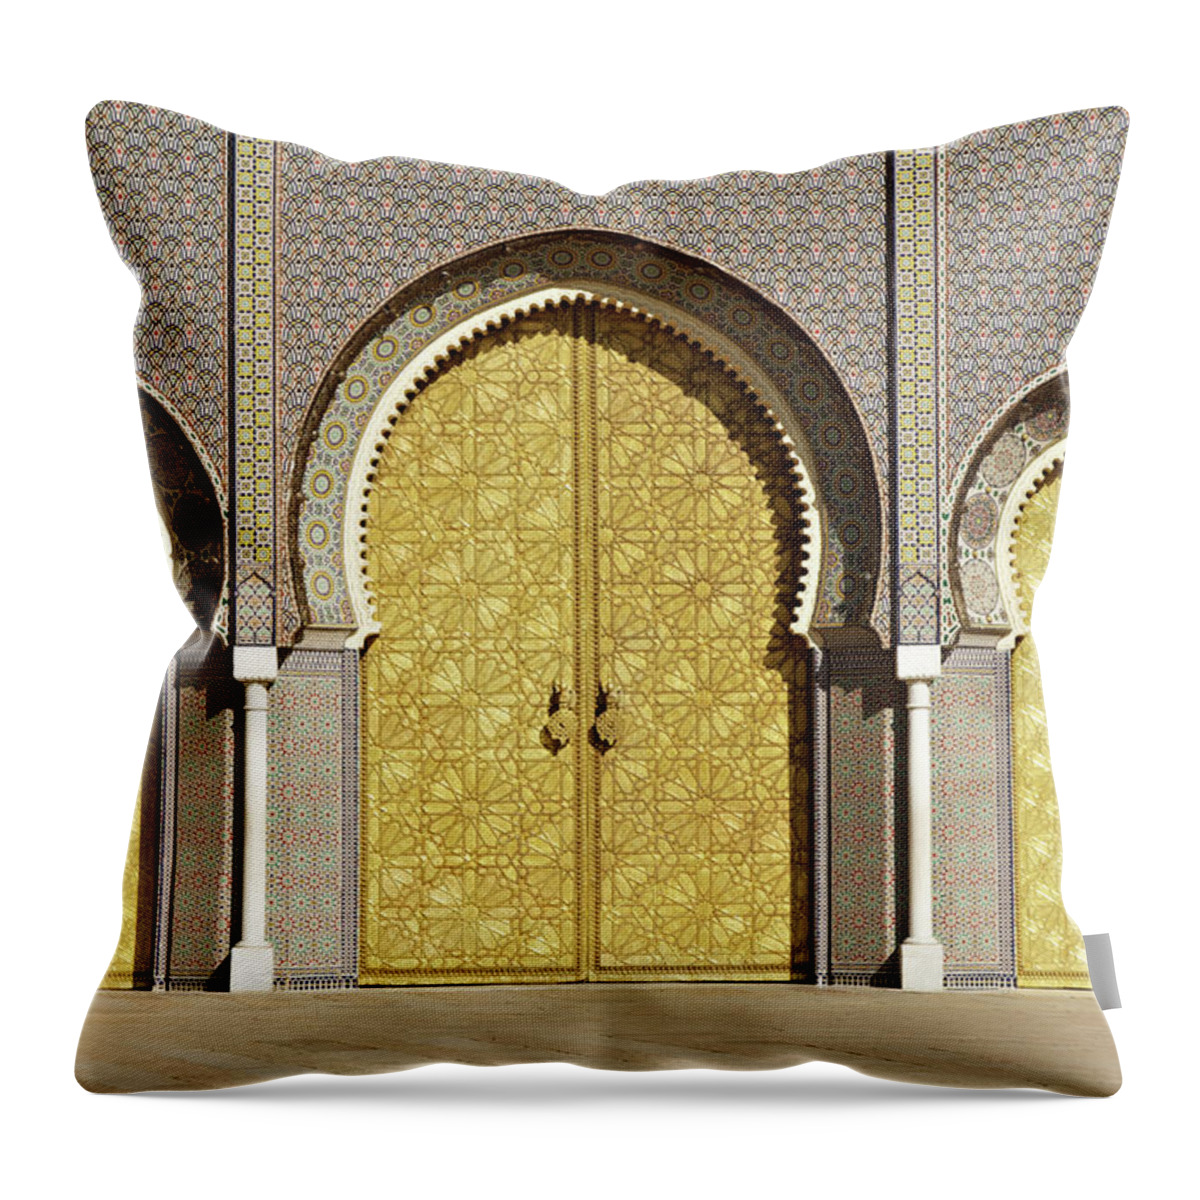 Architectural Feature Throw Pillow featuring the photograph Royal Palace At Fez - Morocco by Nimu1956